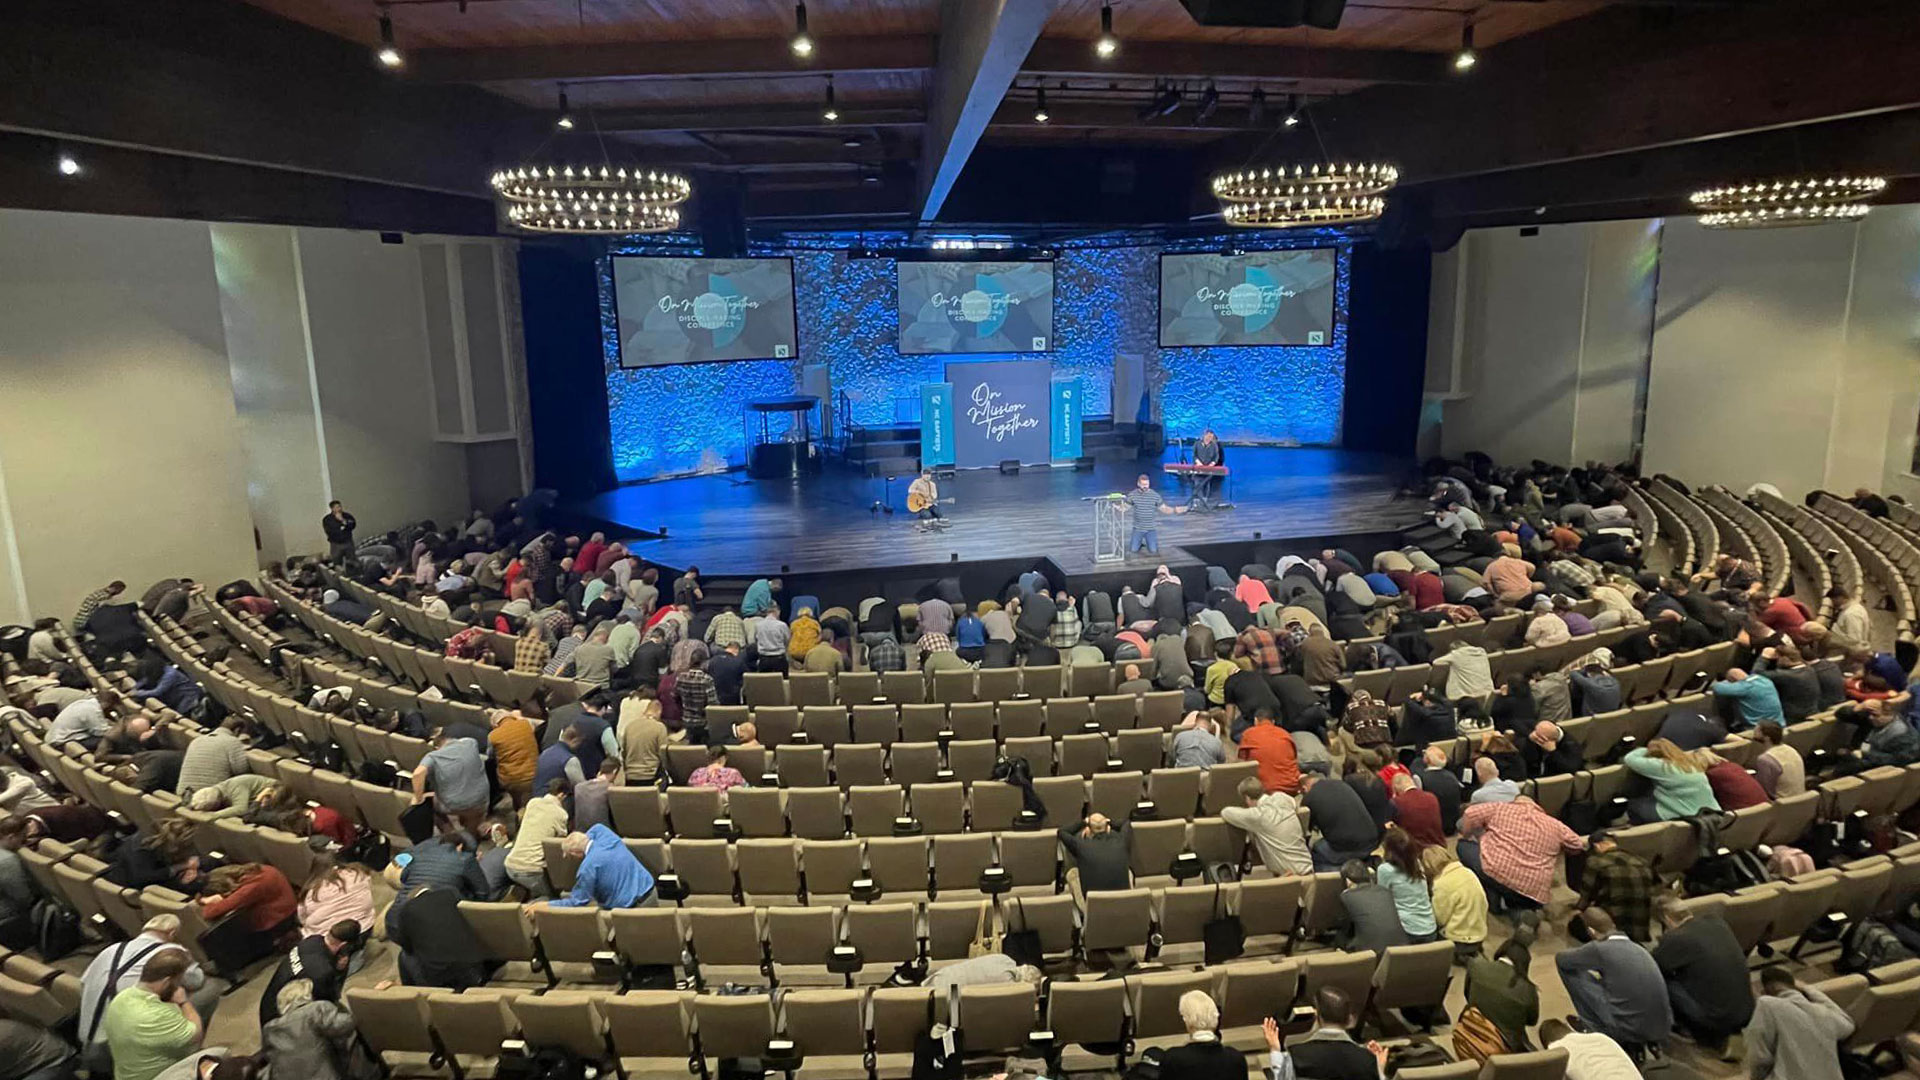 NC Baptists pray for revival at Disciple-Making Conference